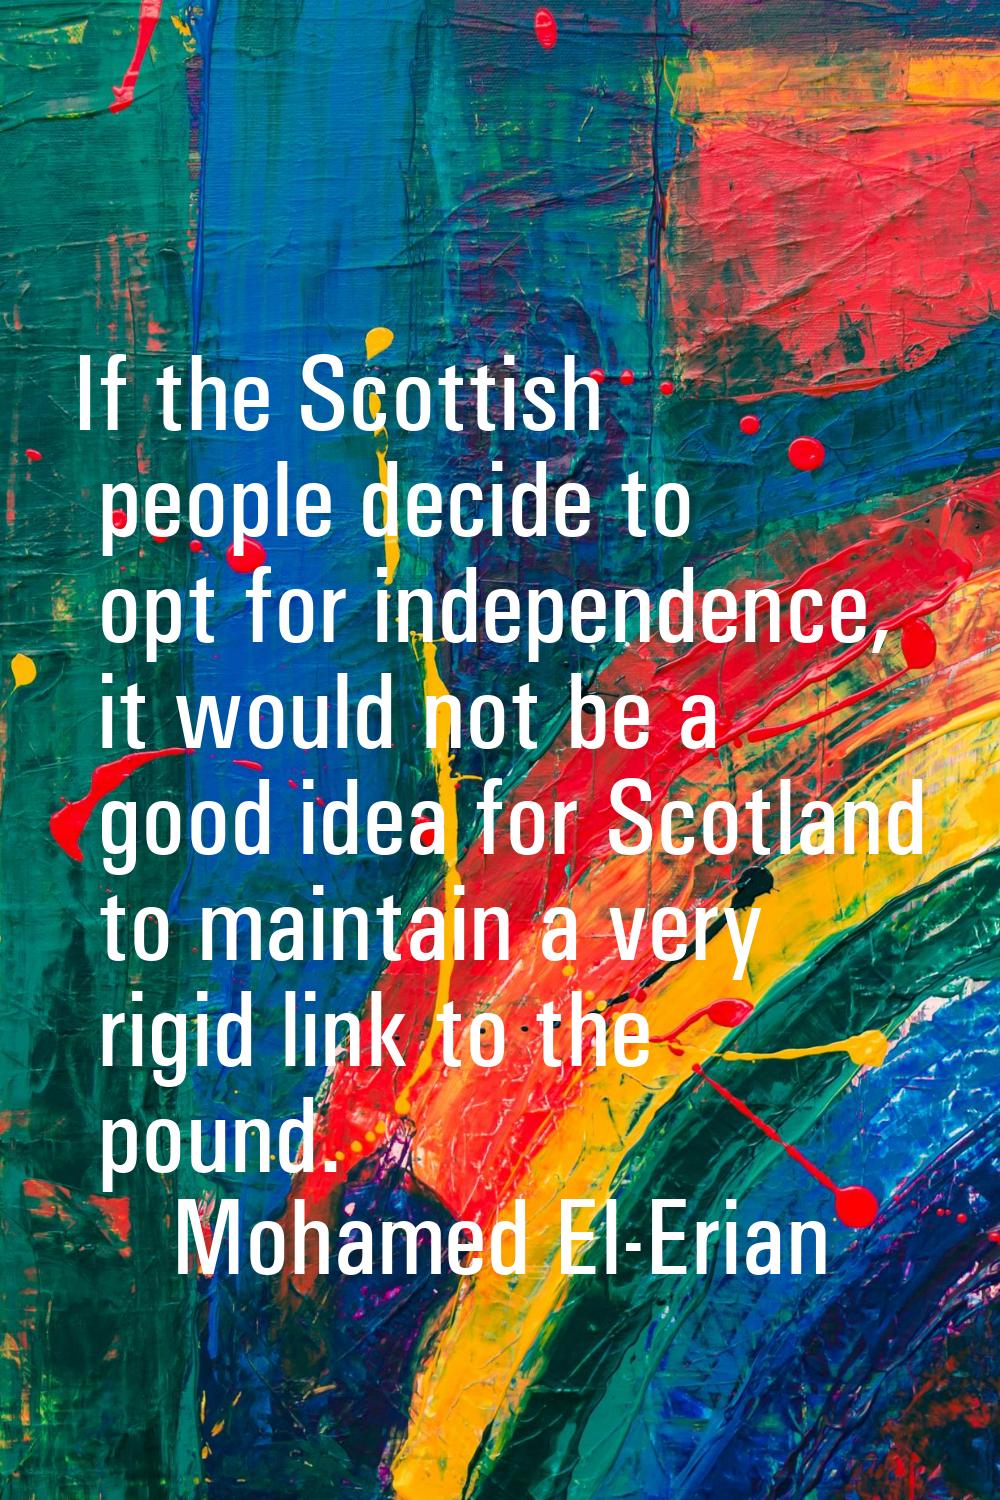 If the Scottish people decide to opt for independence, it would not be a good idea for Scotland to 